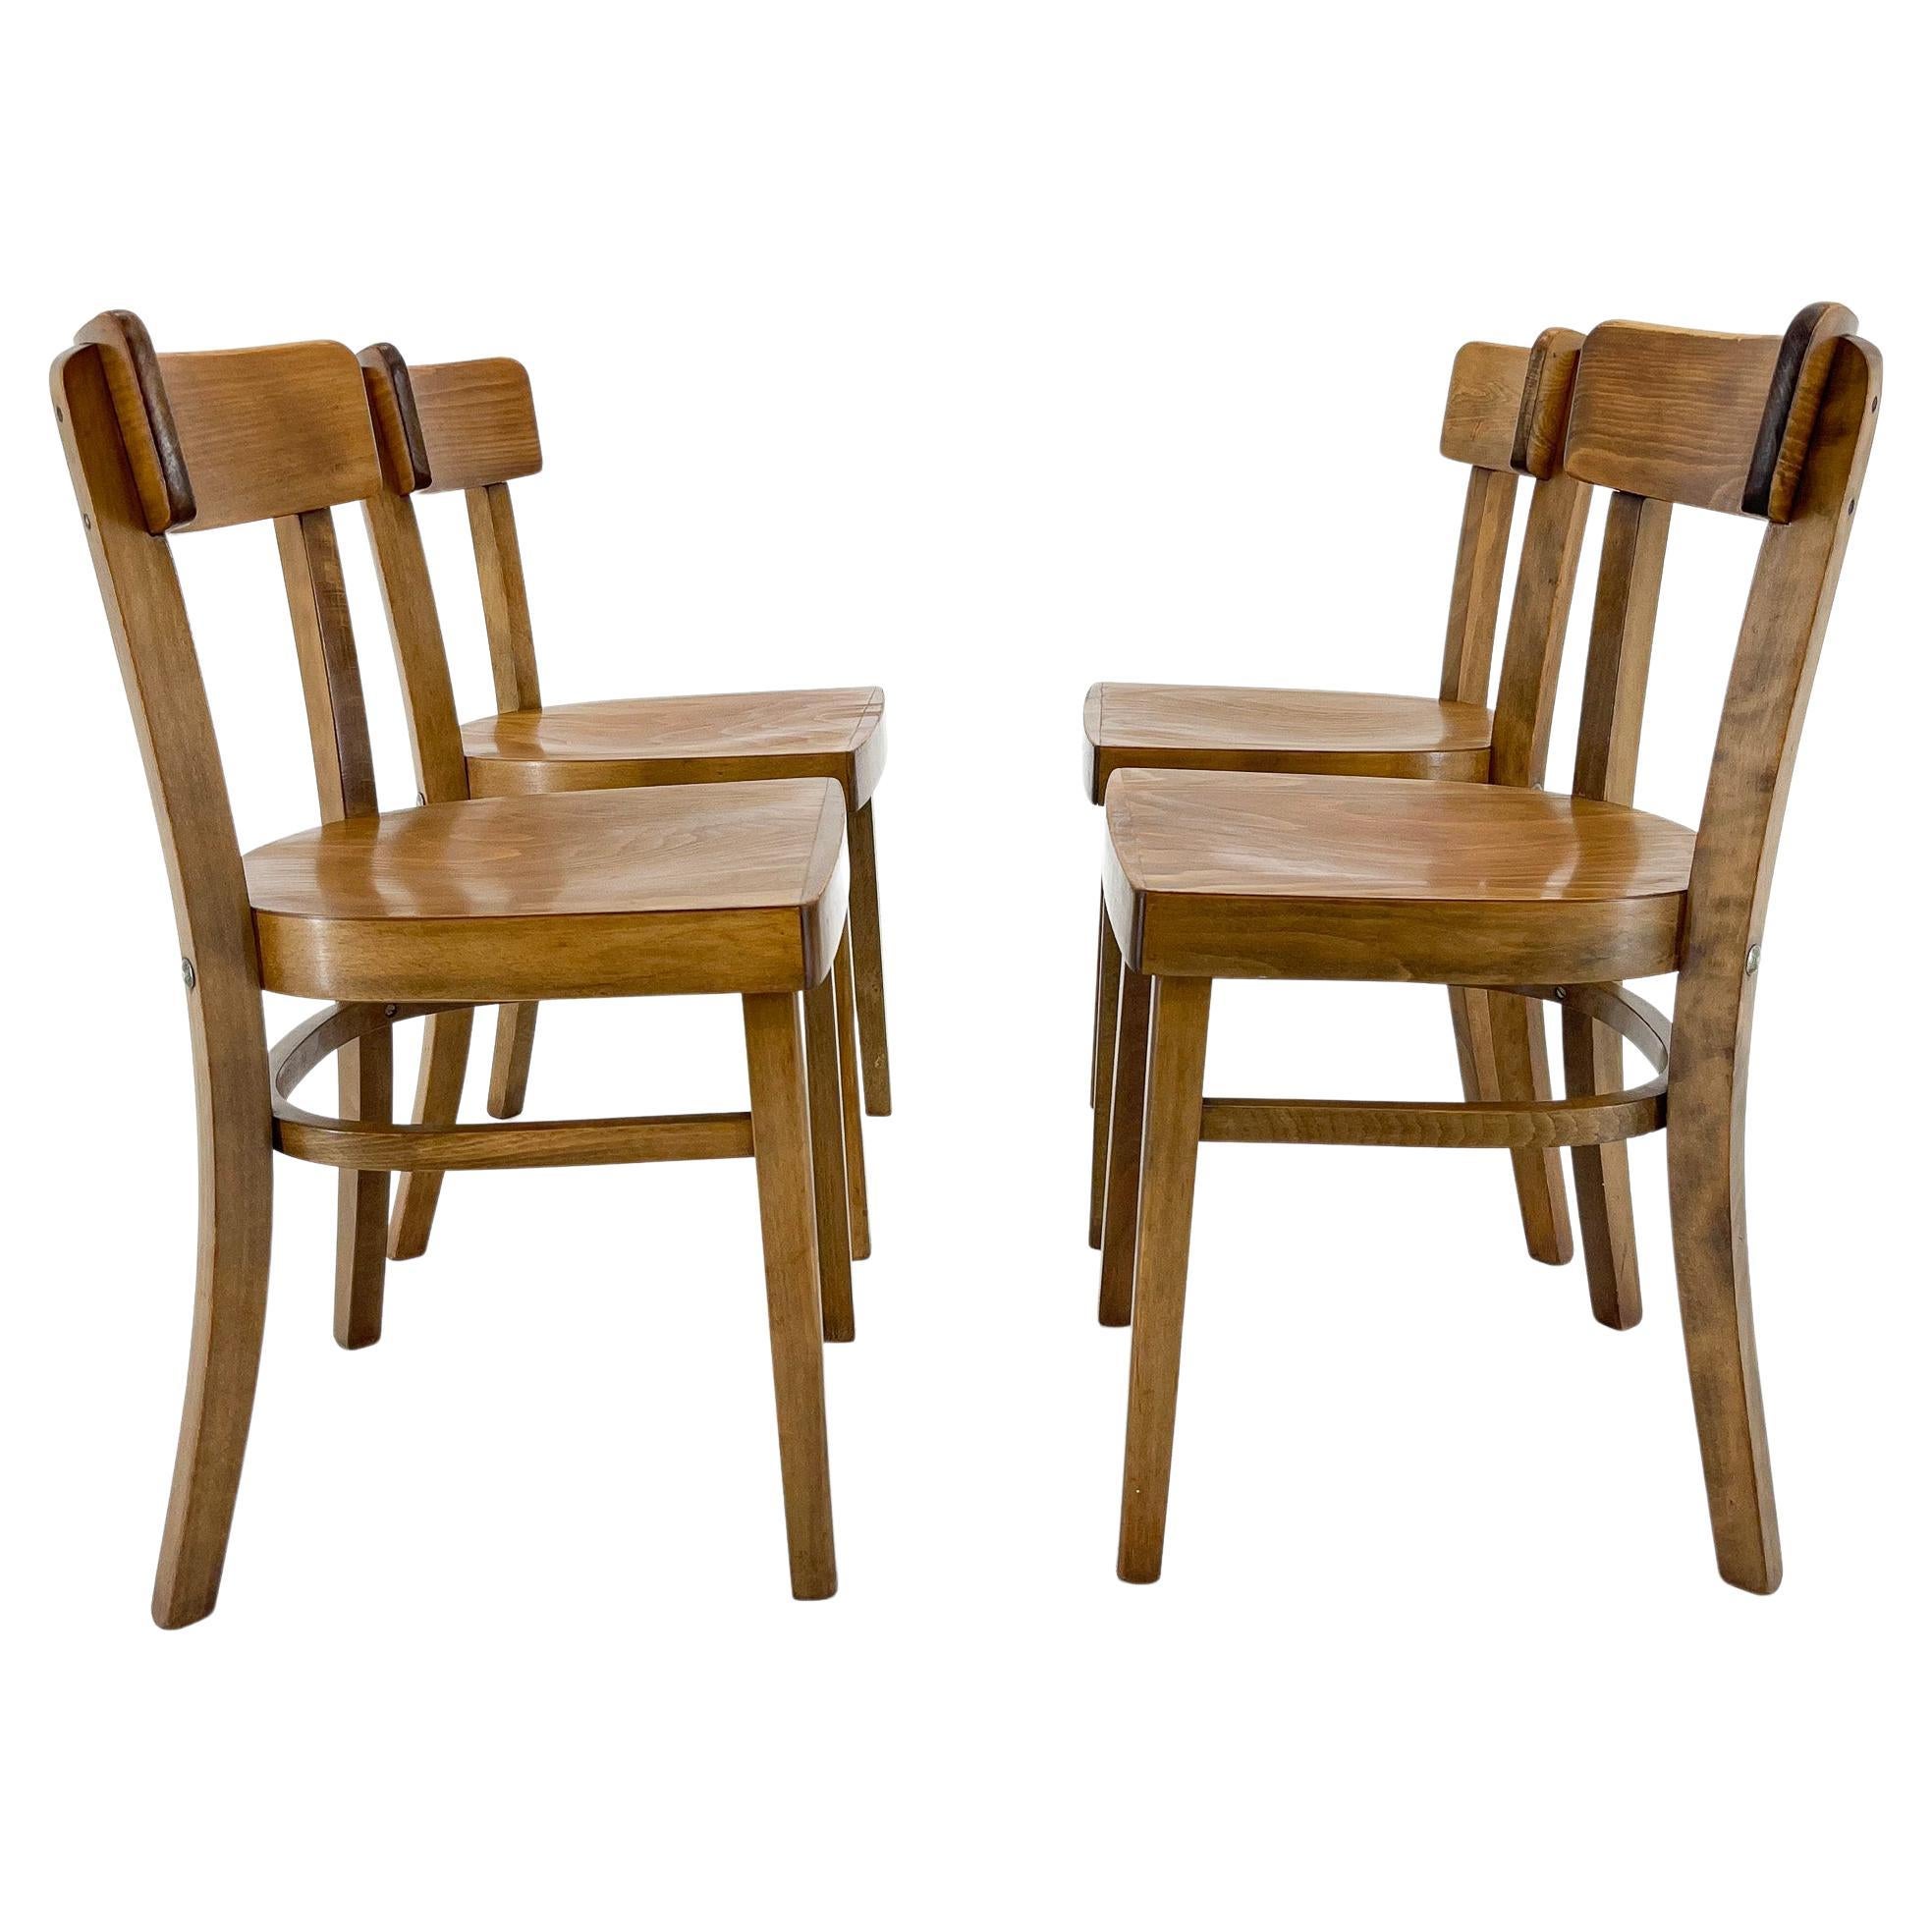 Set of Four Wooden Ton Chairs, Czechoslovakia, 1960s For Sale